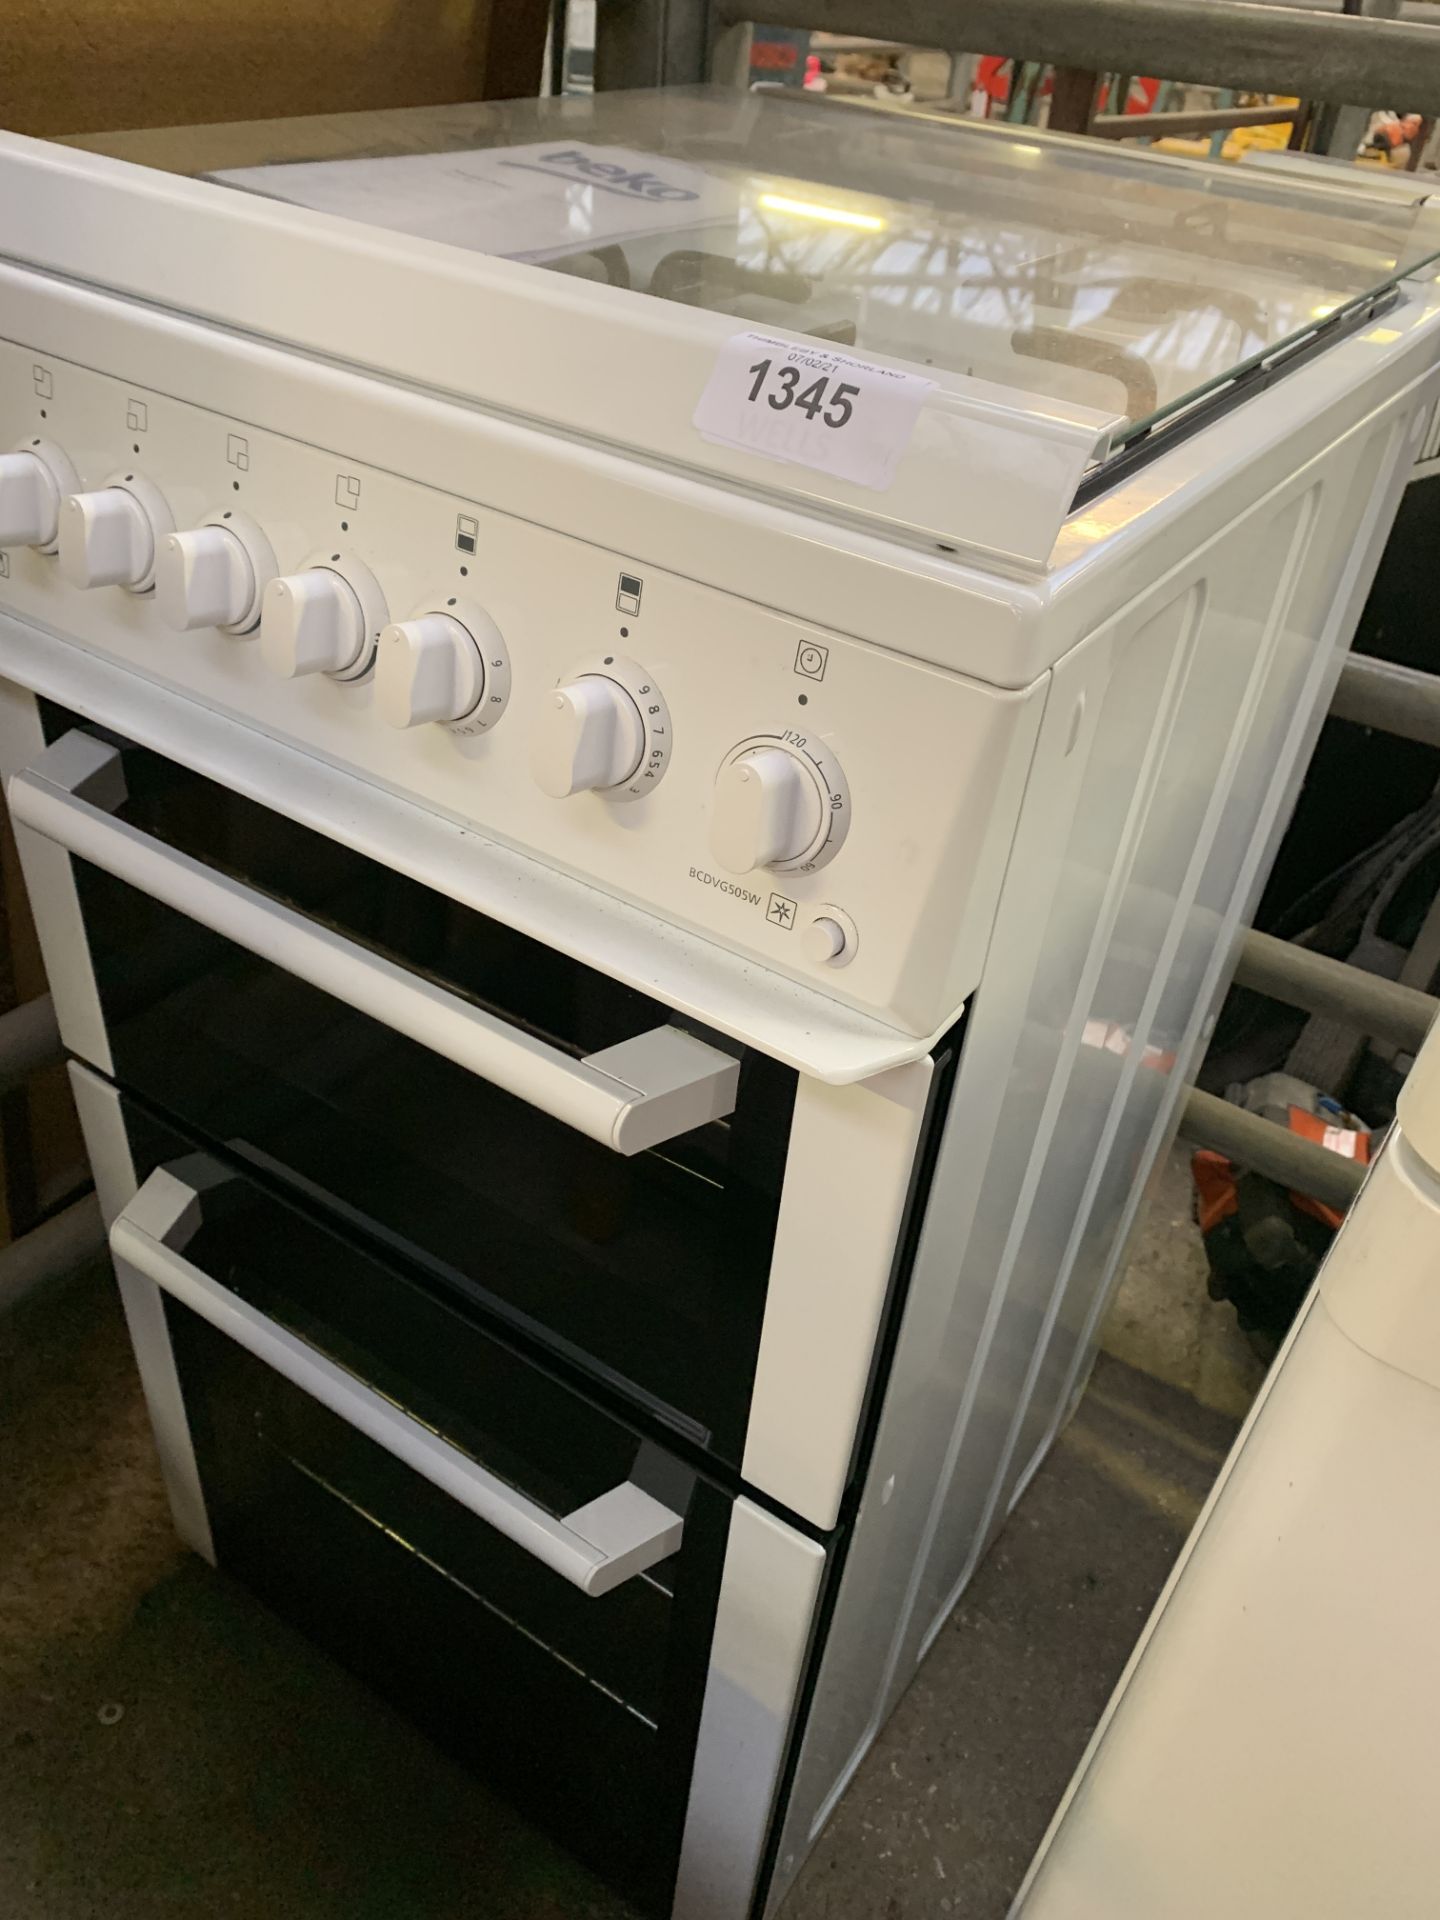 Beko BCDVG505W electric cooker with double oven - Image 4 of 4